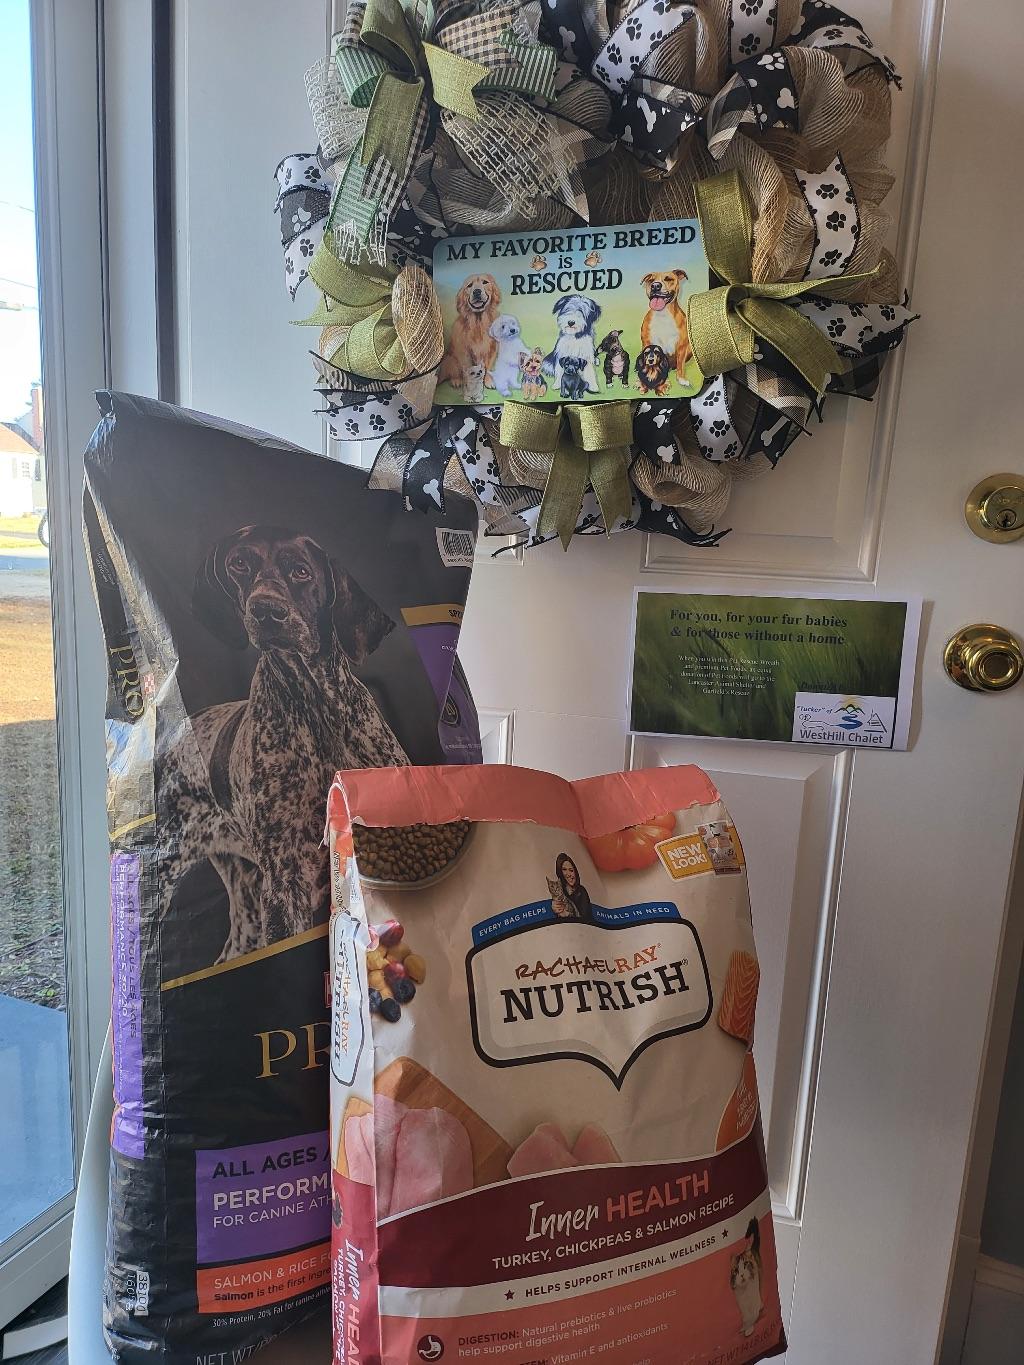 Pet Rescue Wreath and Pet Food